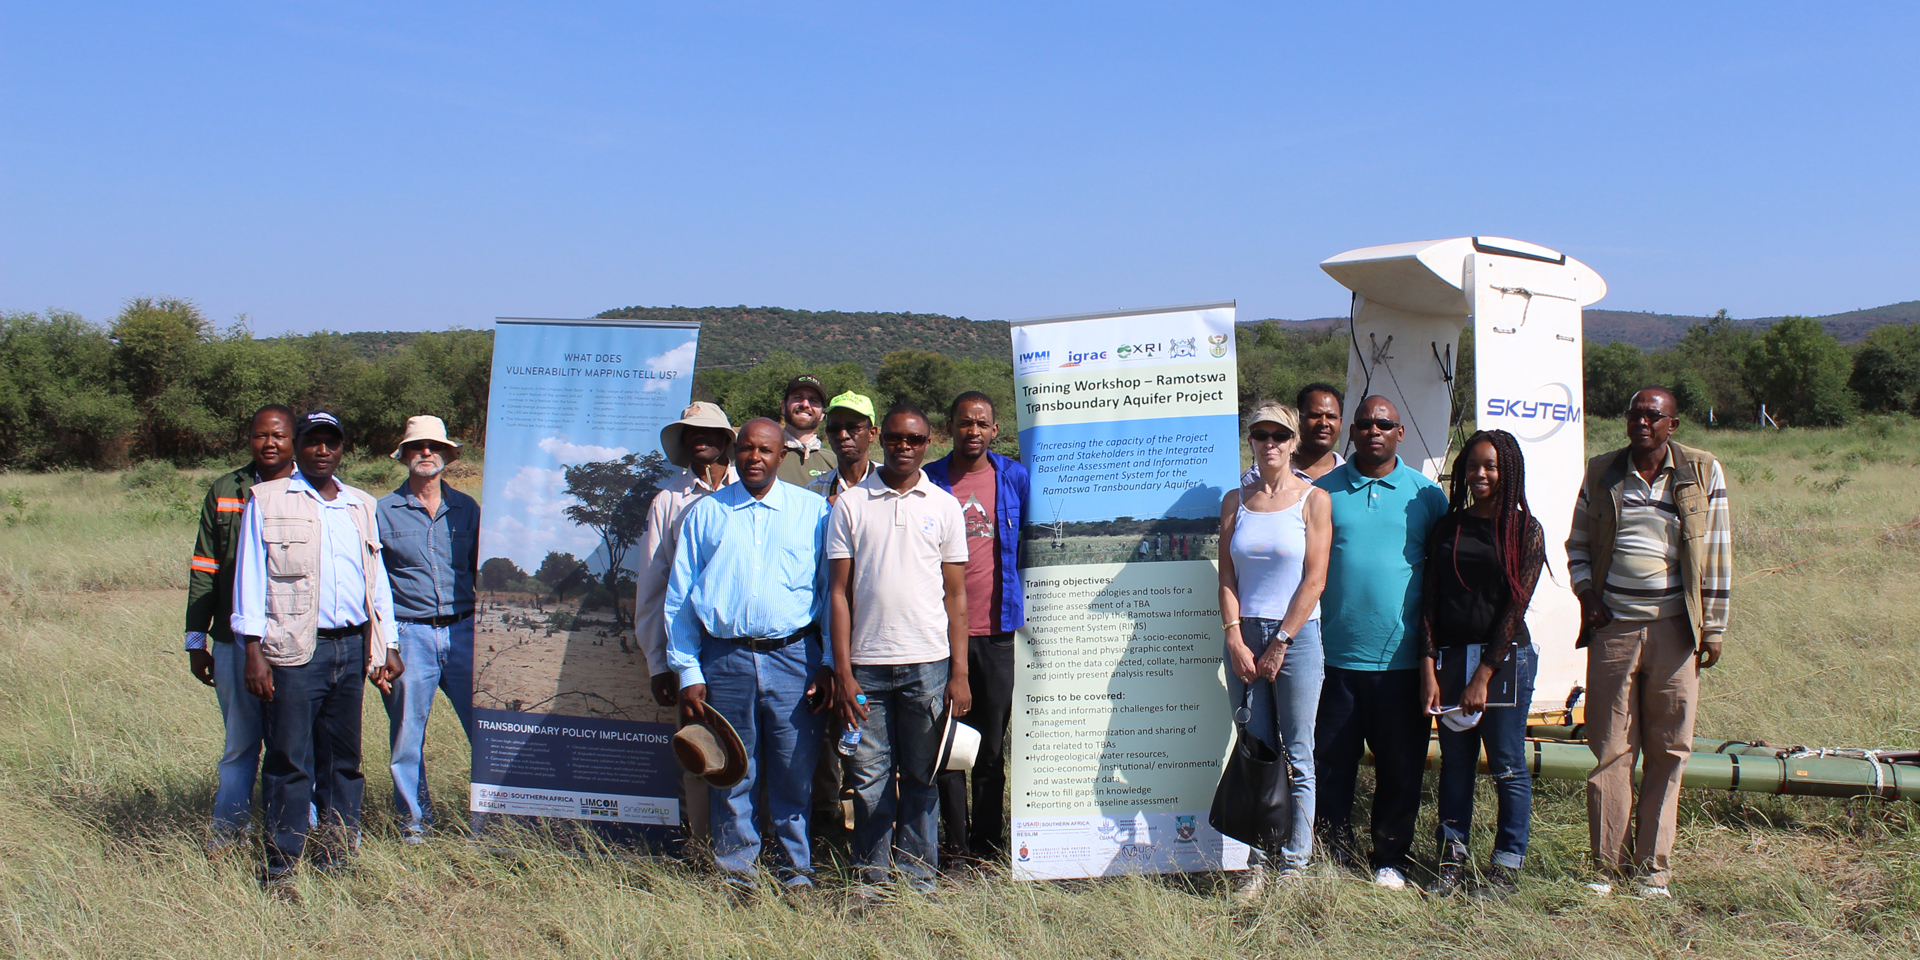 Image of several people in a field posing beside several posters for a training workshop. Behind them is a large drone marked 